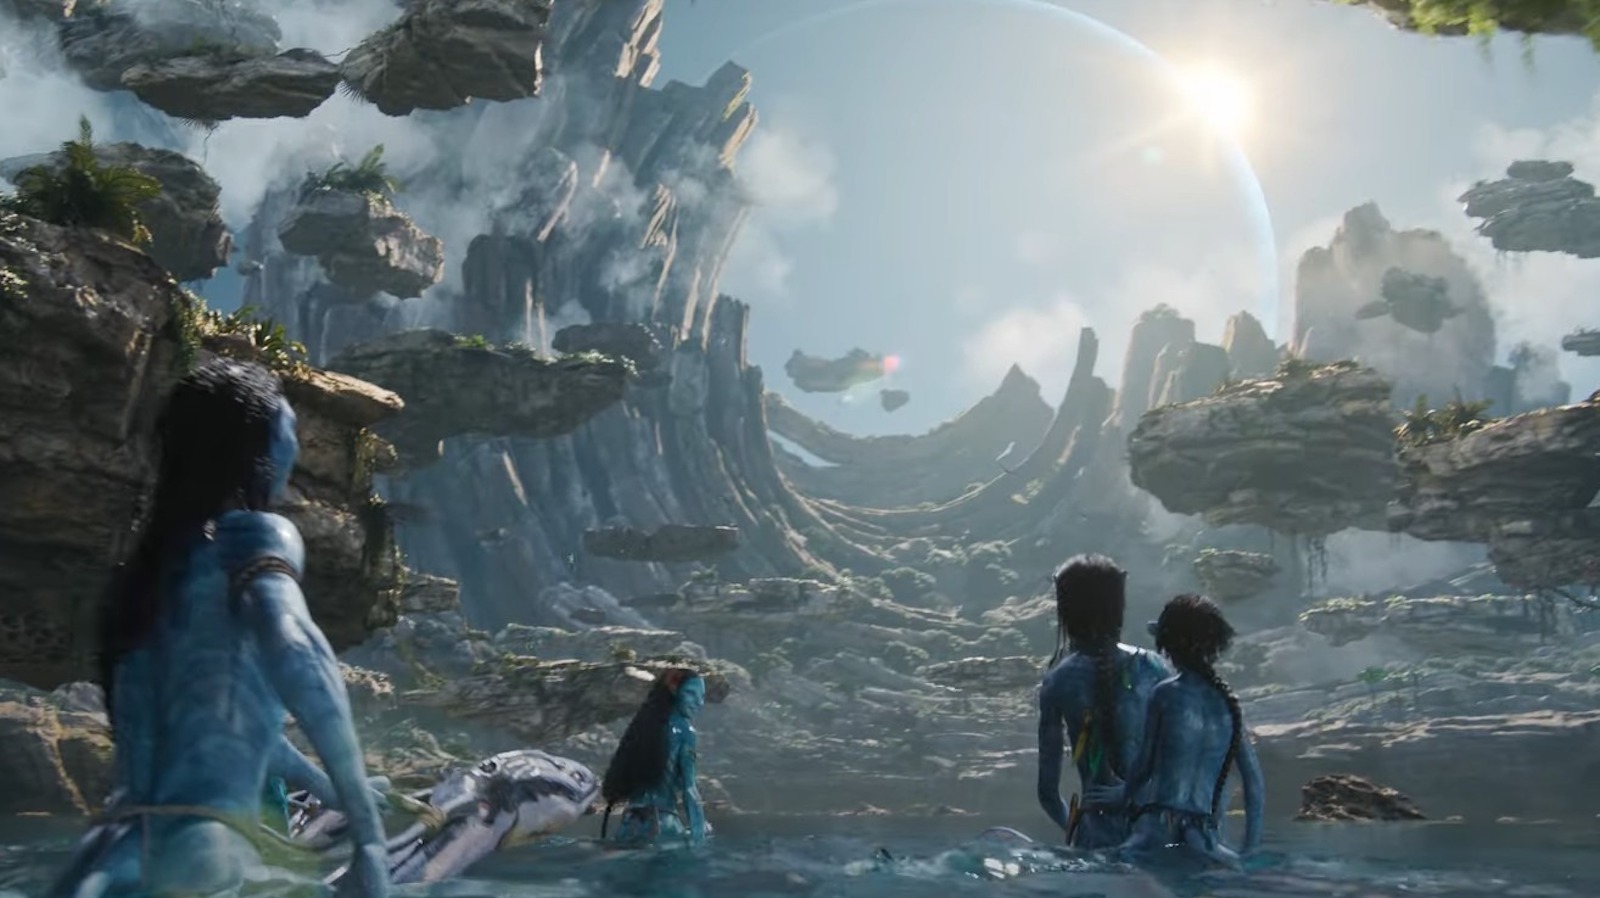 Does Avatar: The Way Of Water Prove That 3D Movies Are Still Relevant?